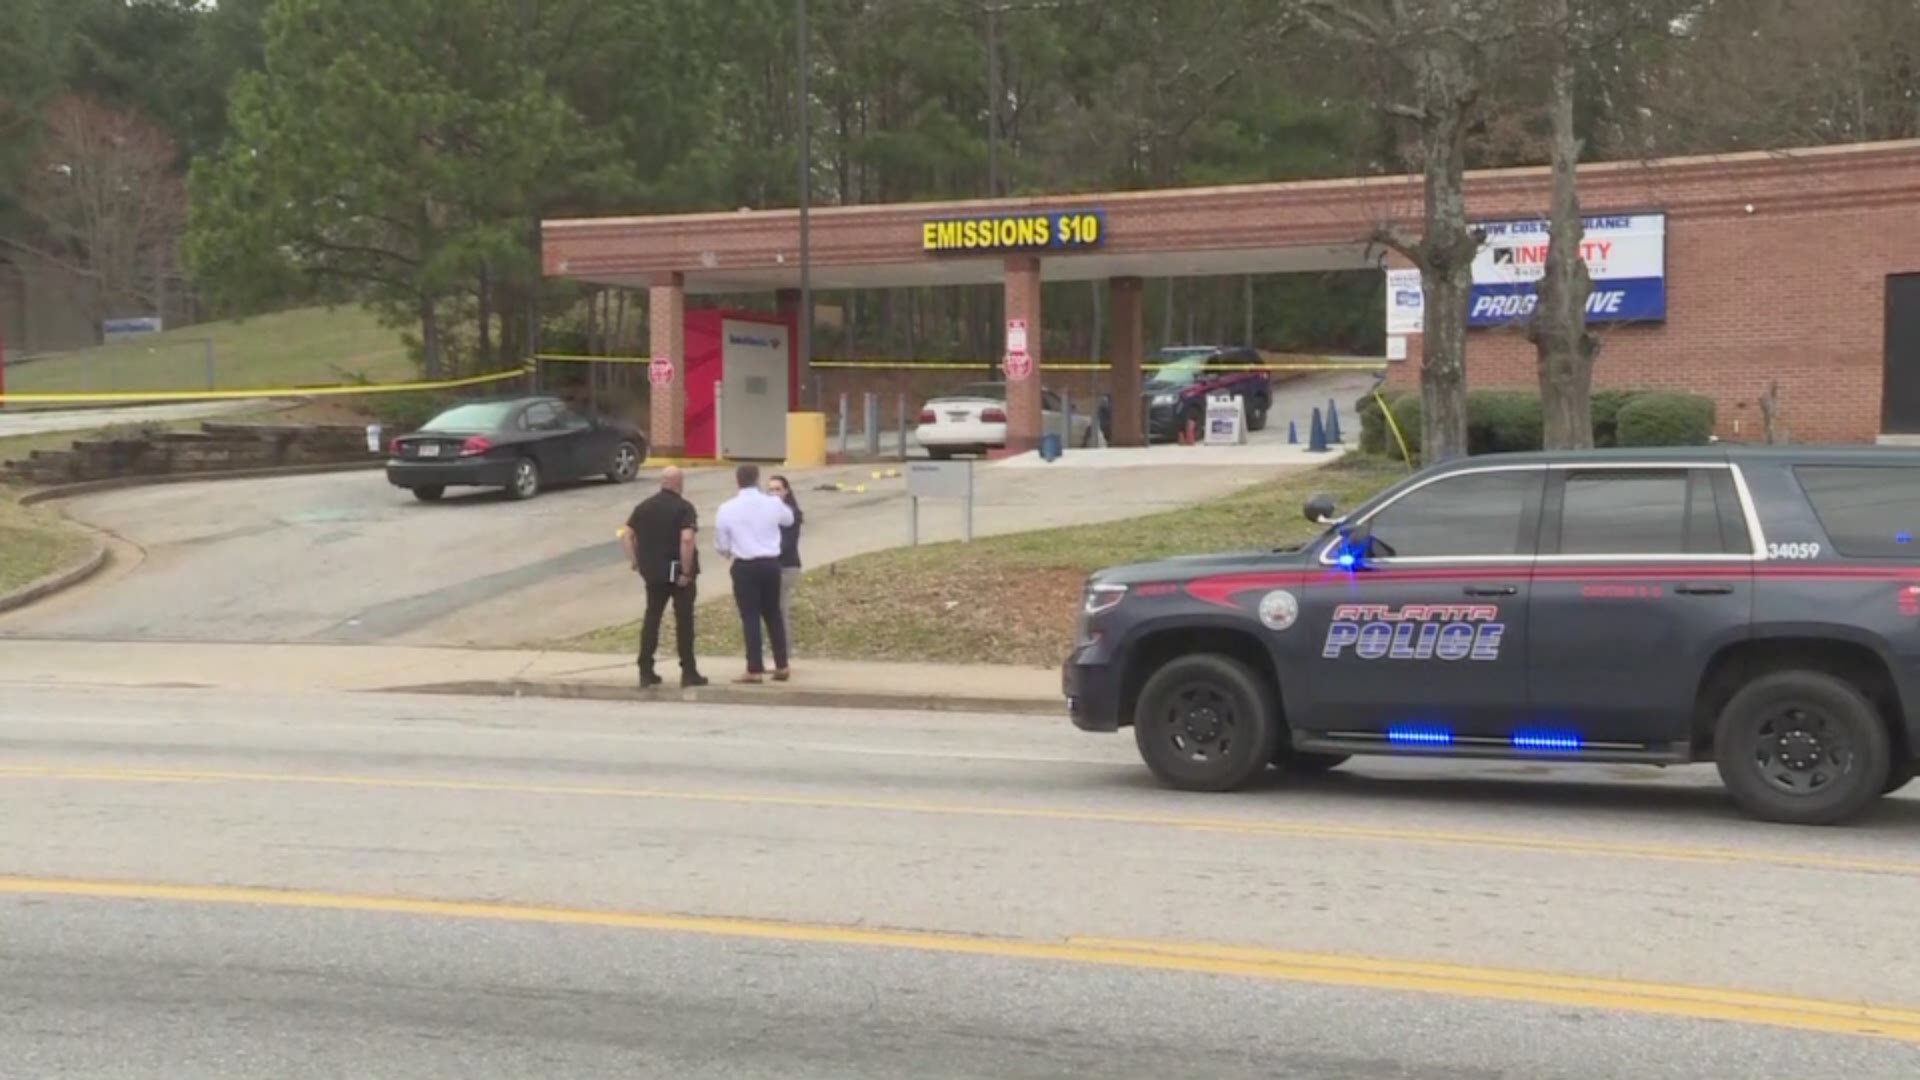 Atlanta Police said a woman was critically injured in a shooting on Campbellton Road Wednesday afternoon. They said when officers arrived, they discovered the woman with a gunshot wound to the torso.